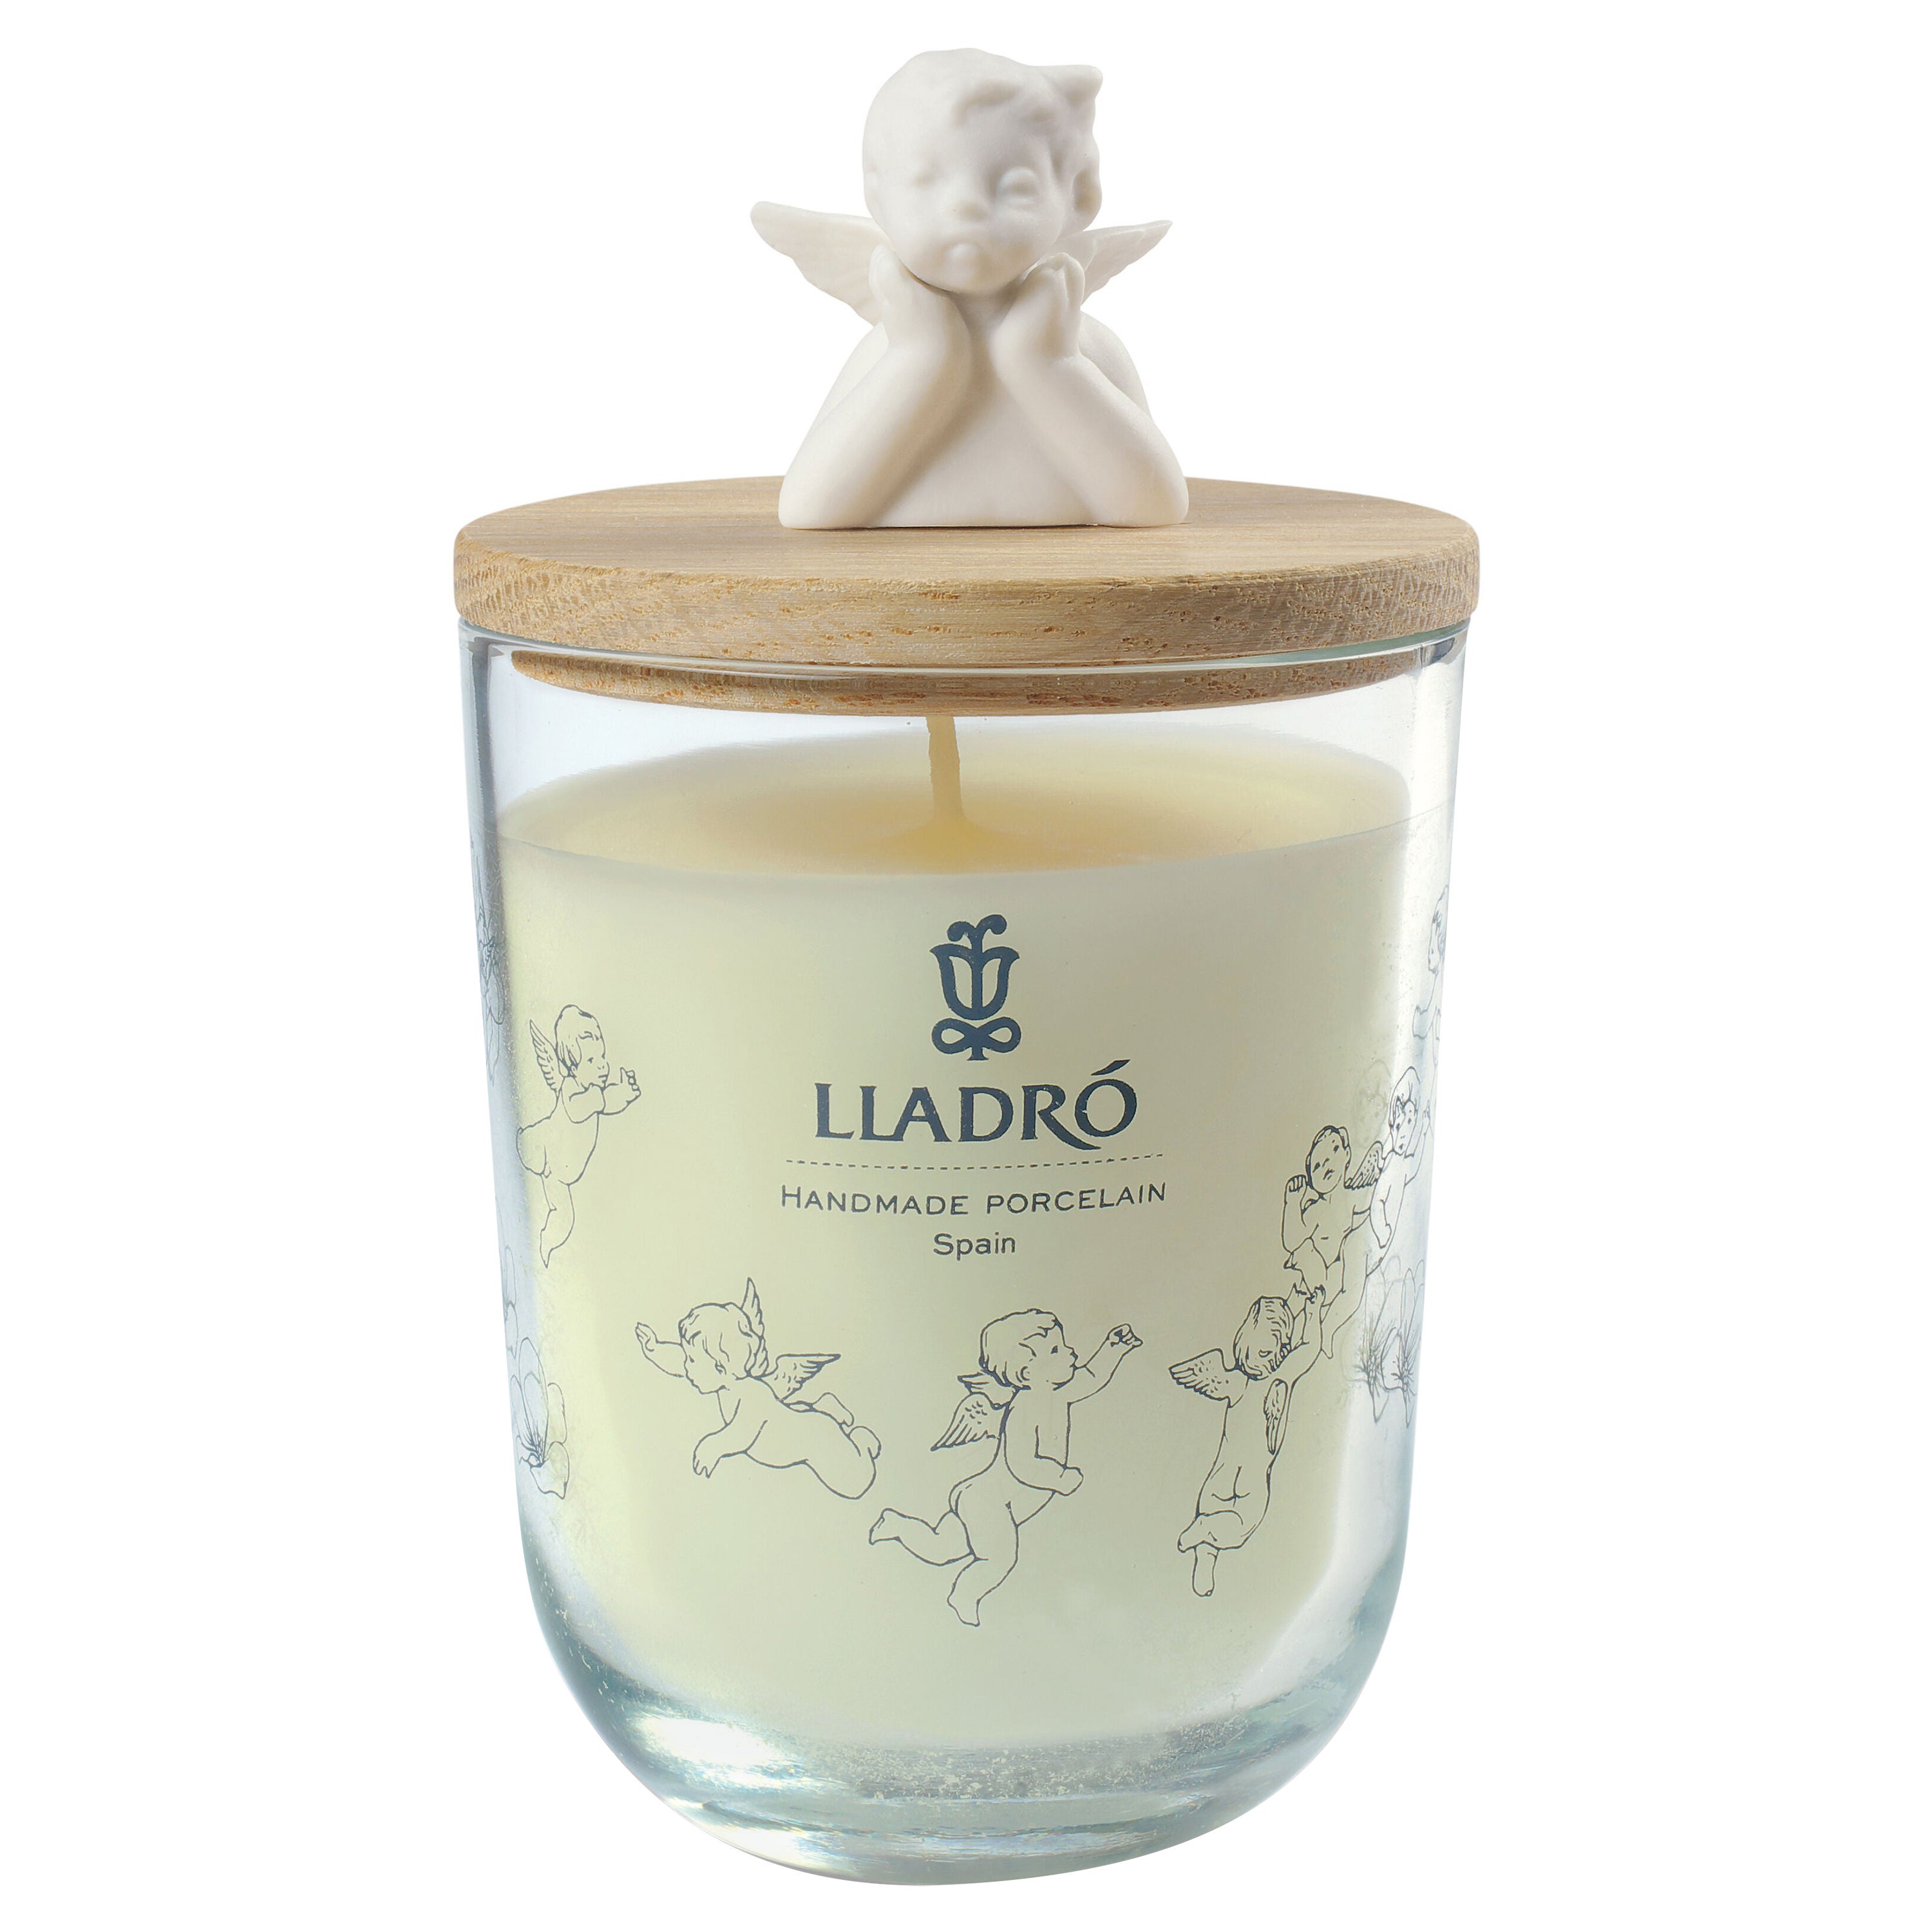 In Stock in Los Angeles, Missing You Candle Tropical Blossoms Scent